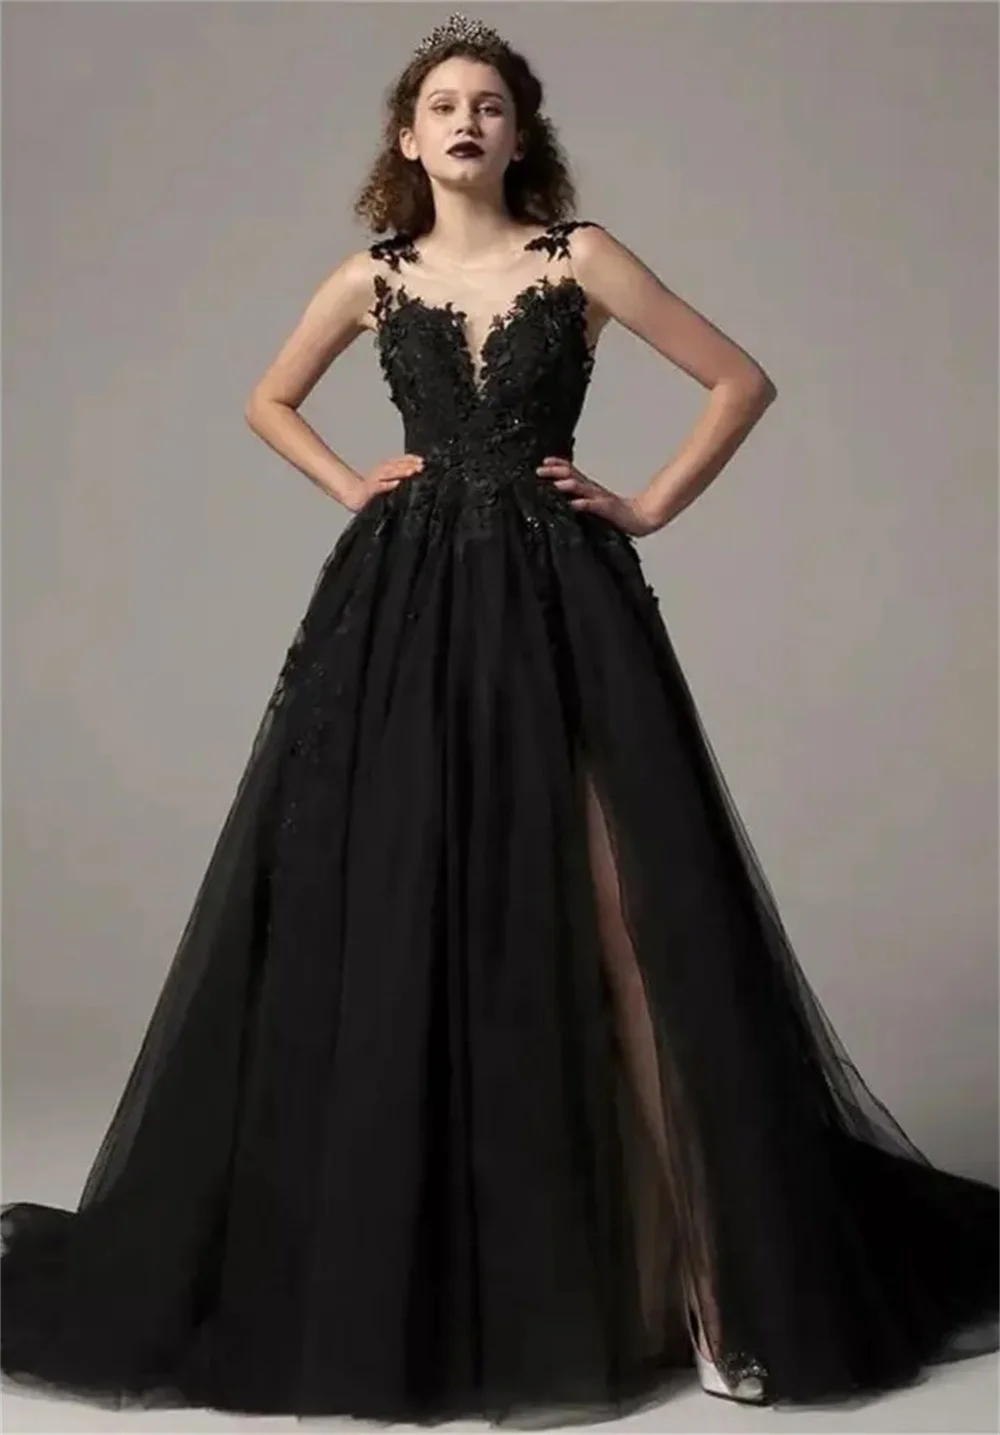 Vintage Gothic Black Lace Victorian Bustle Gothic Evening Dress With High  Neck And Long Sleeves For Women Perfect For Prom, Parties, And Special  Occasions 2023 Collection From Sexybride, $138.05 | DHgate.Com